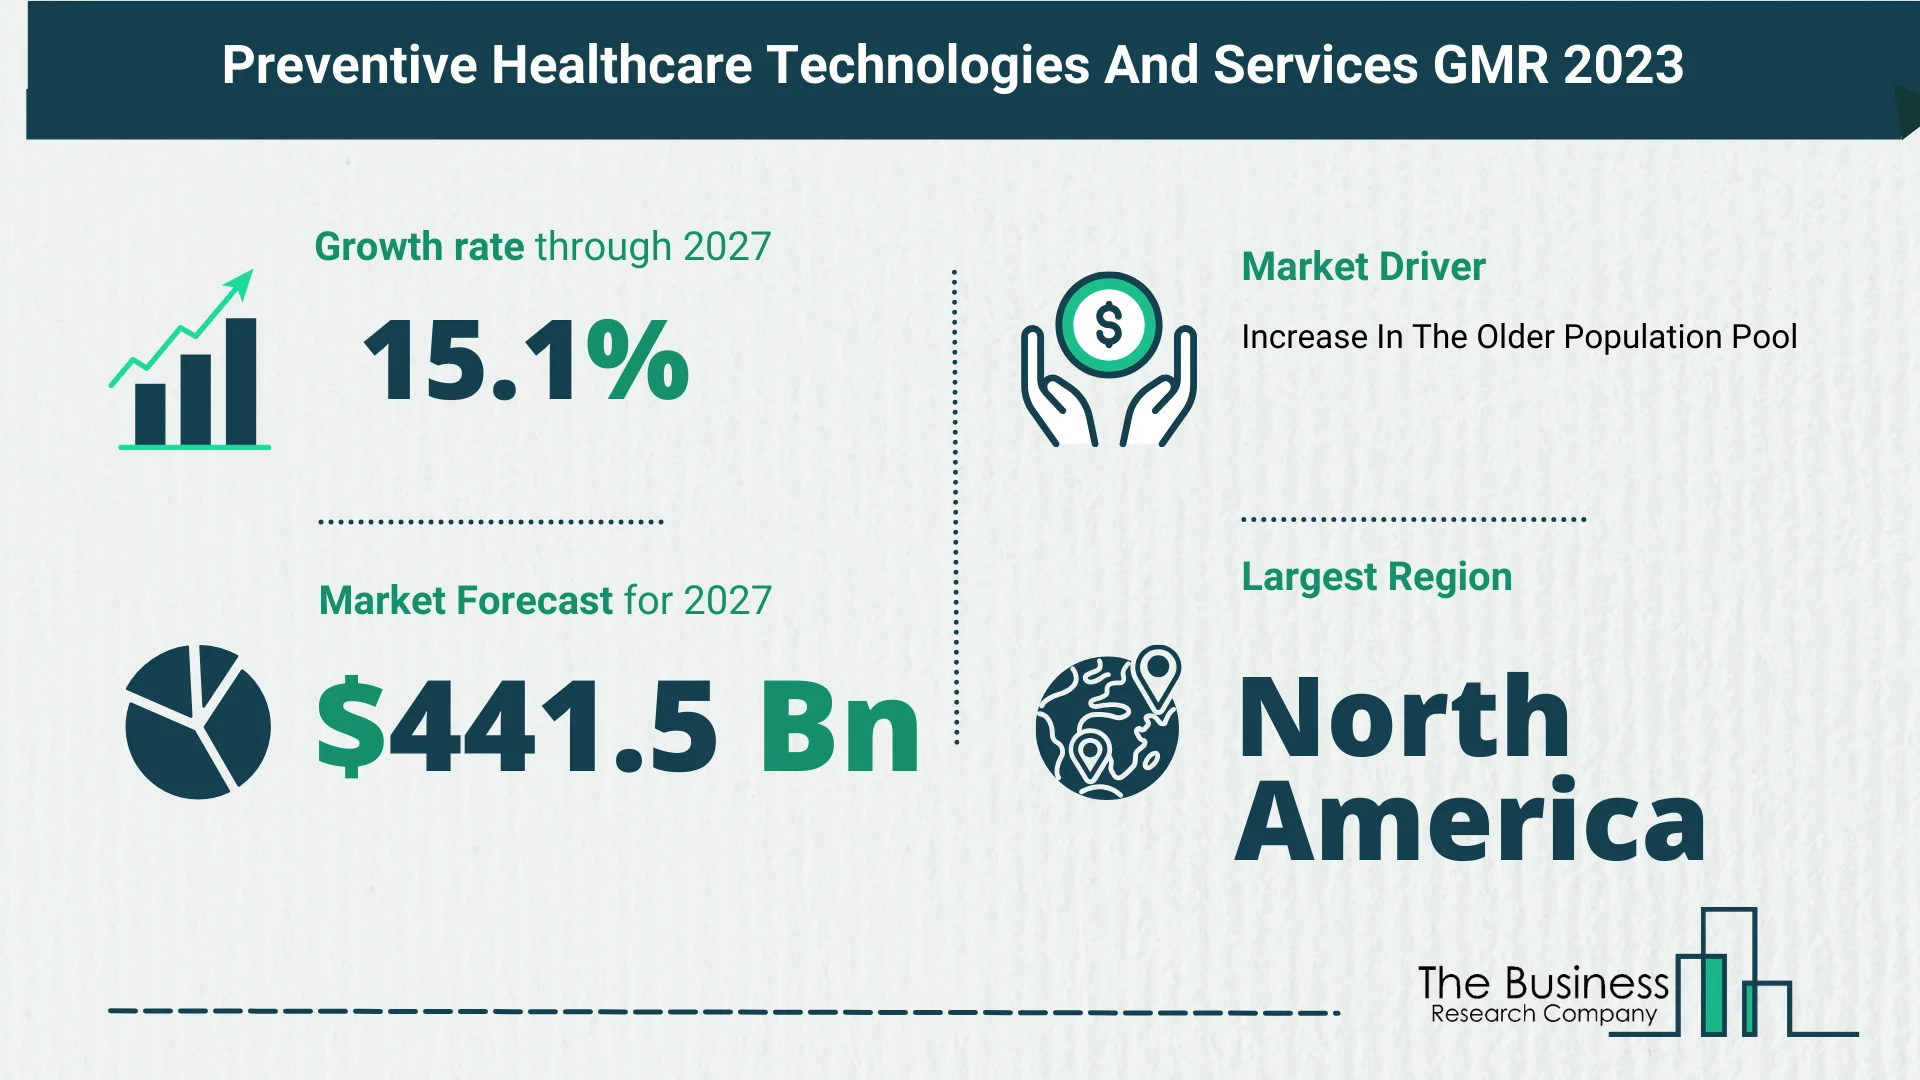 Understand How The Preventive Healthcare Technologies And Services Market Is Poised To Grow Through 2023-2032